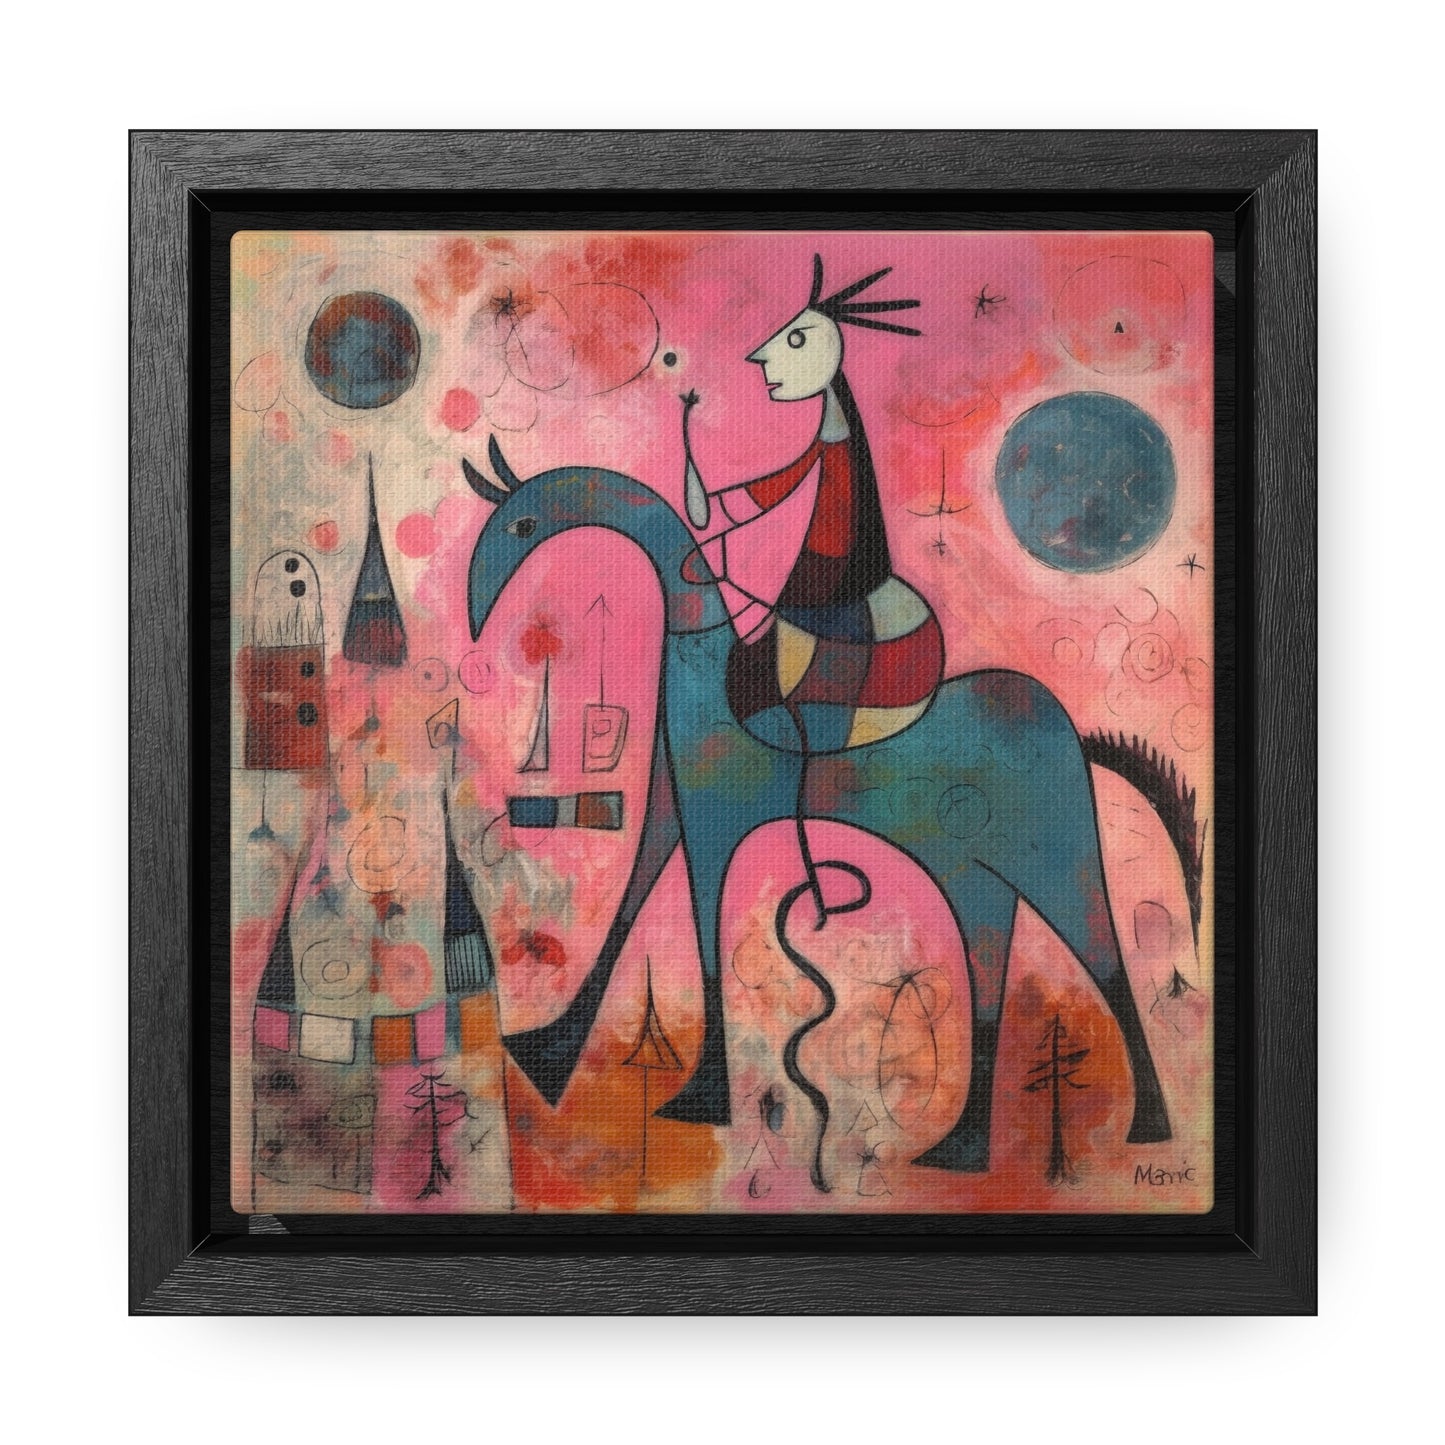 The Dreams of the Child 31, Gallery Canvas Wraps, Square Frame